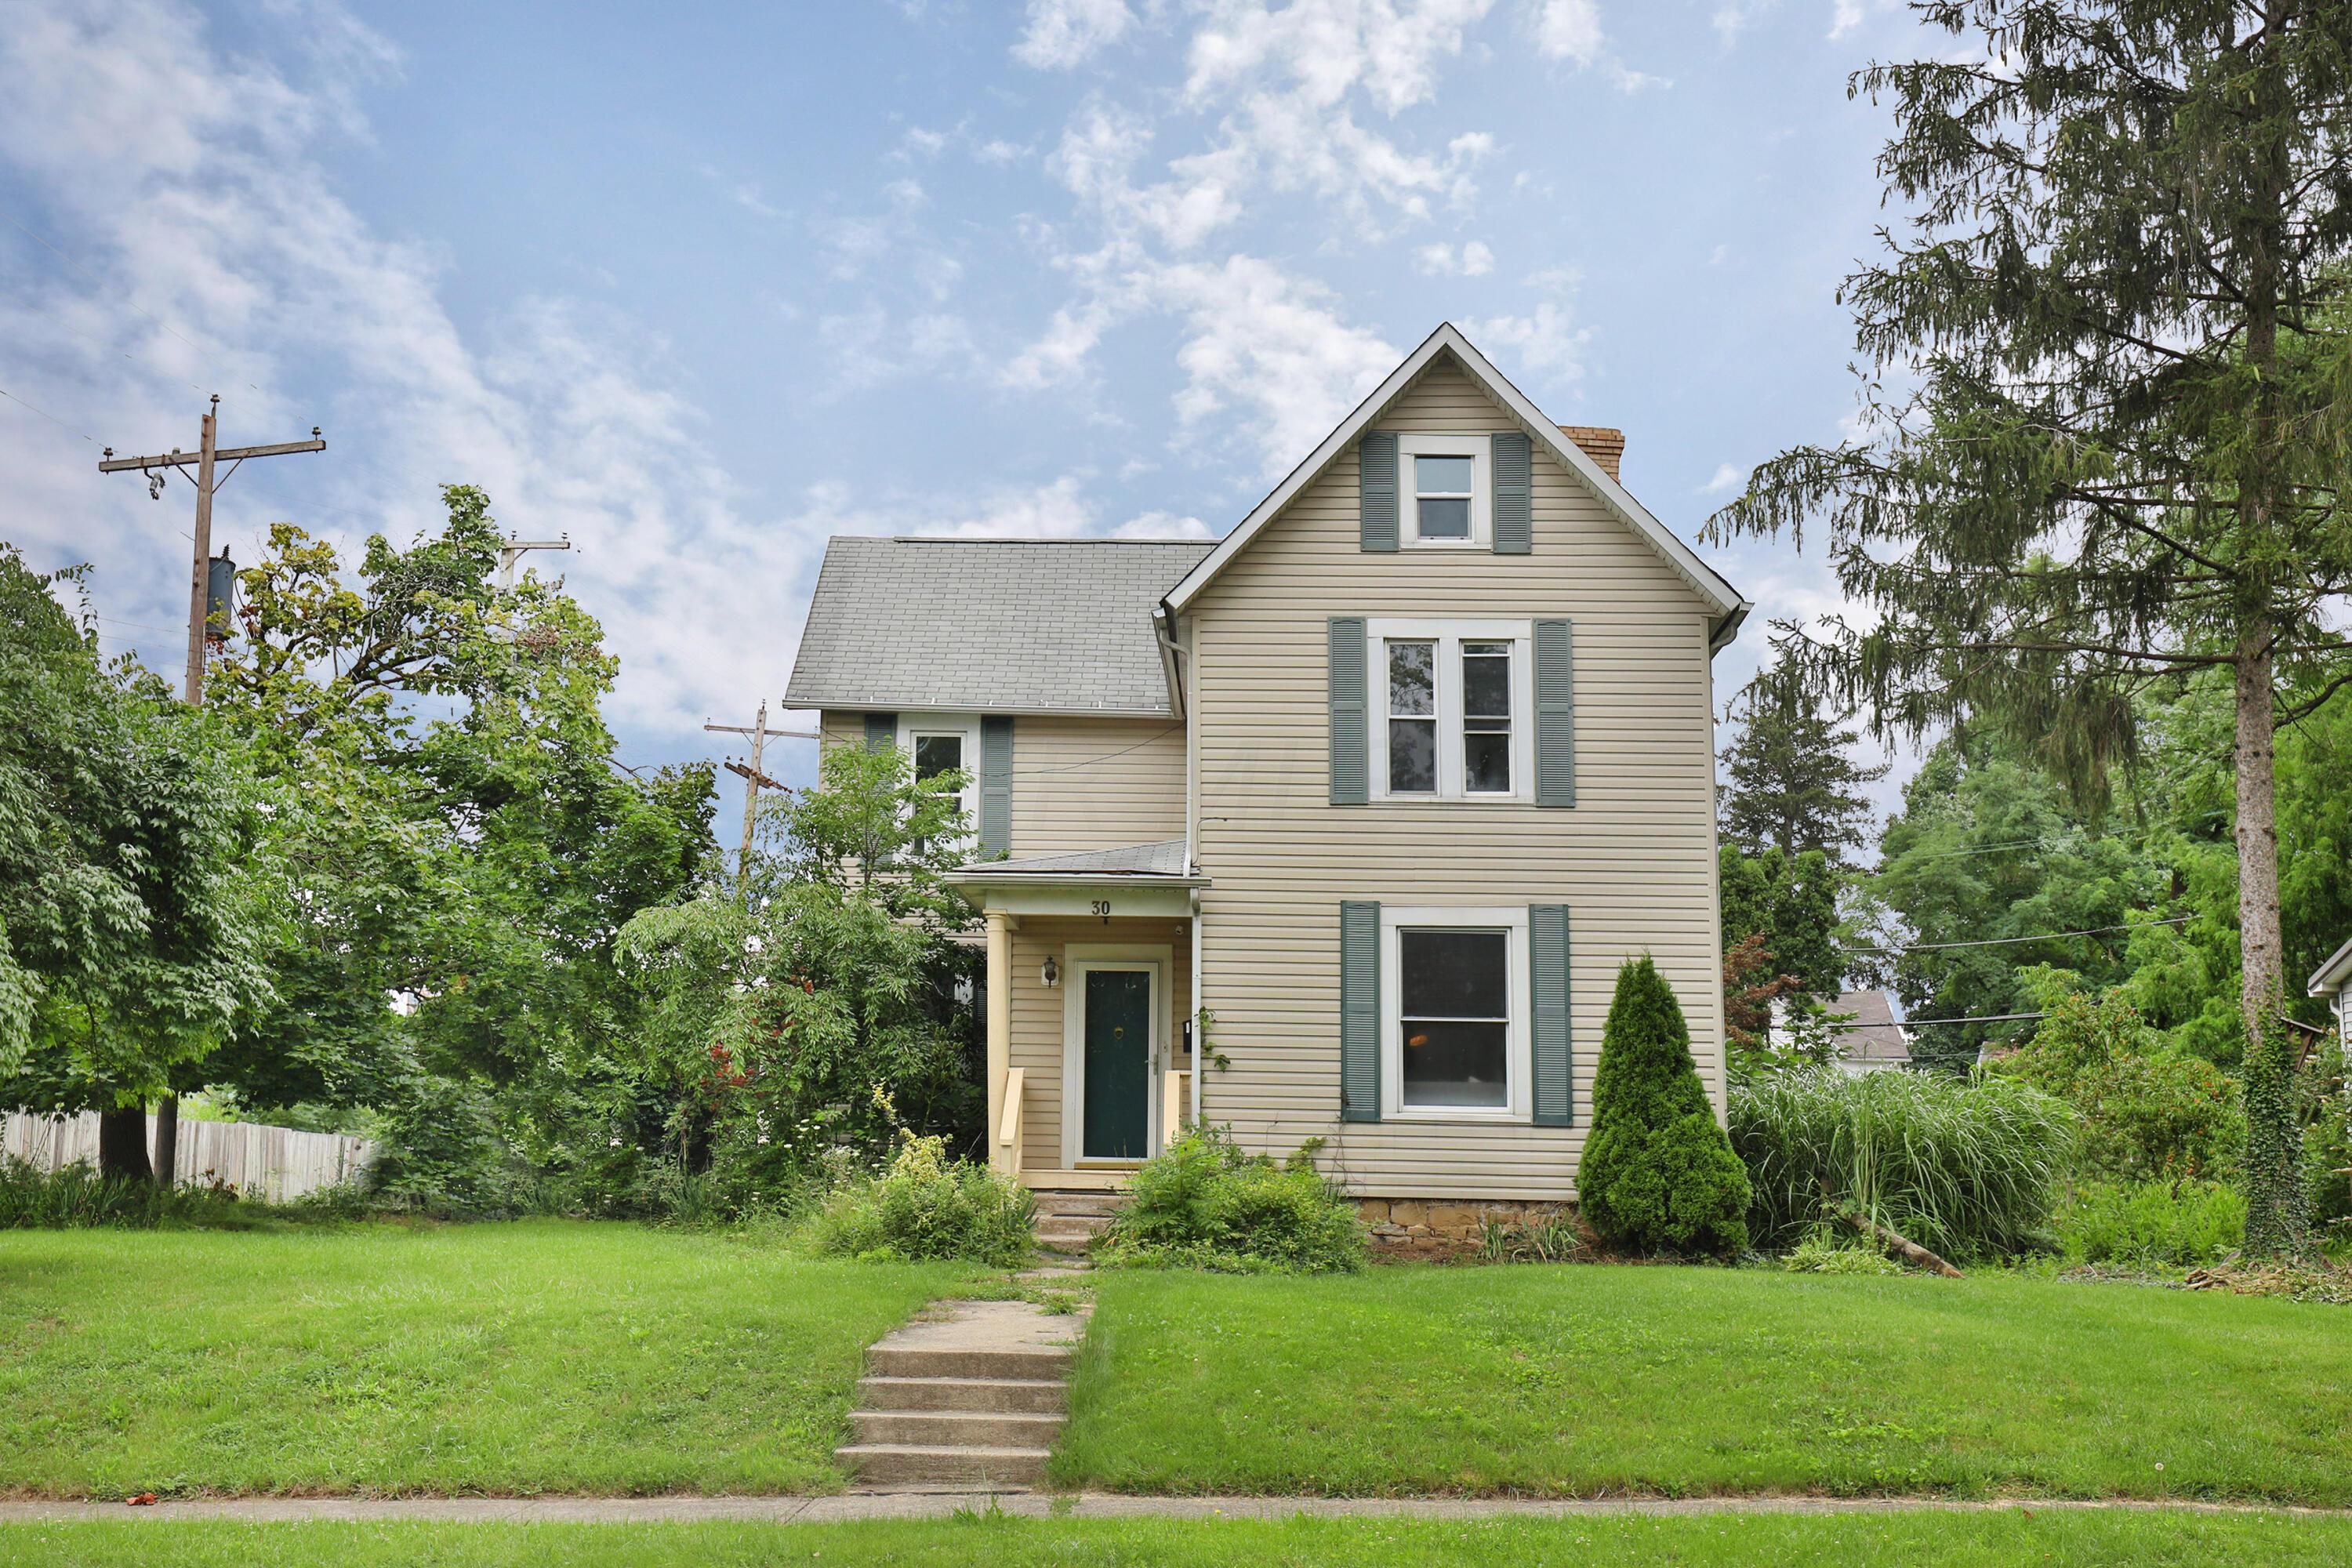 30 E Lincoln Ave, Columbus, OH 43214 - MLS 221029336 - Coldwell Banker